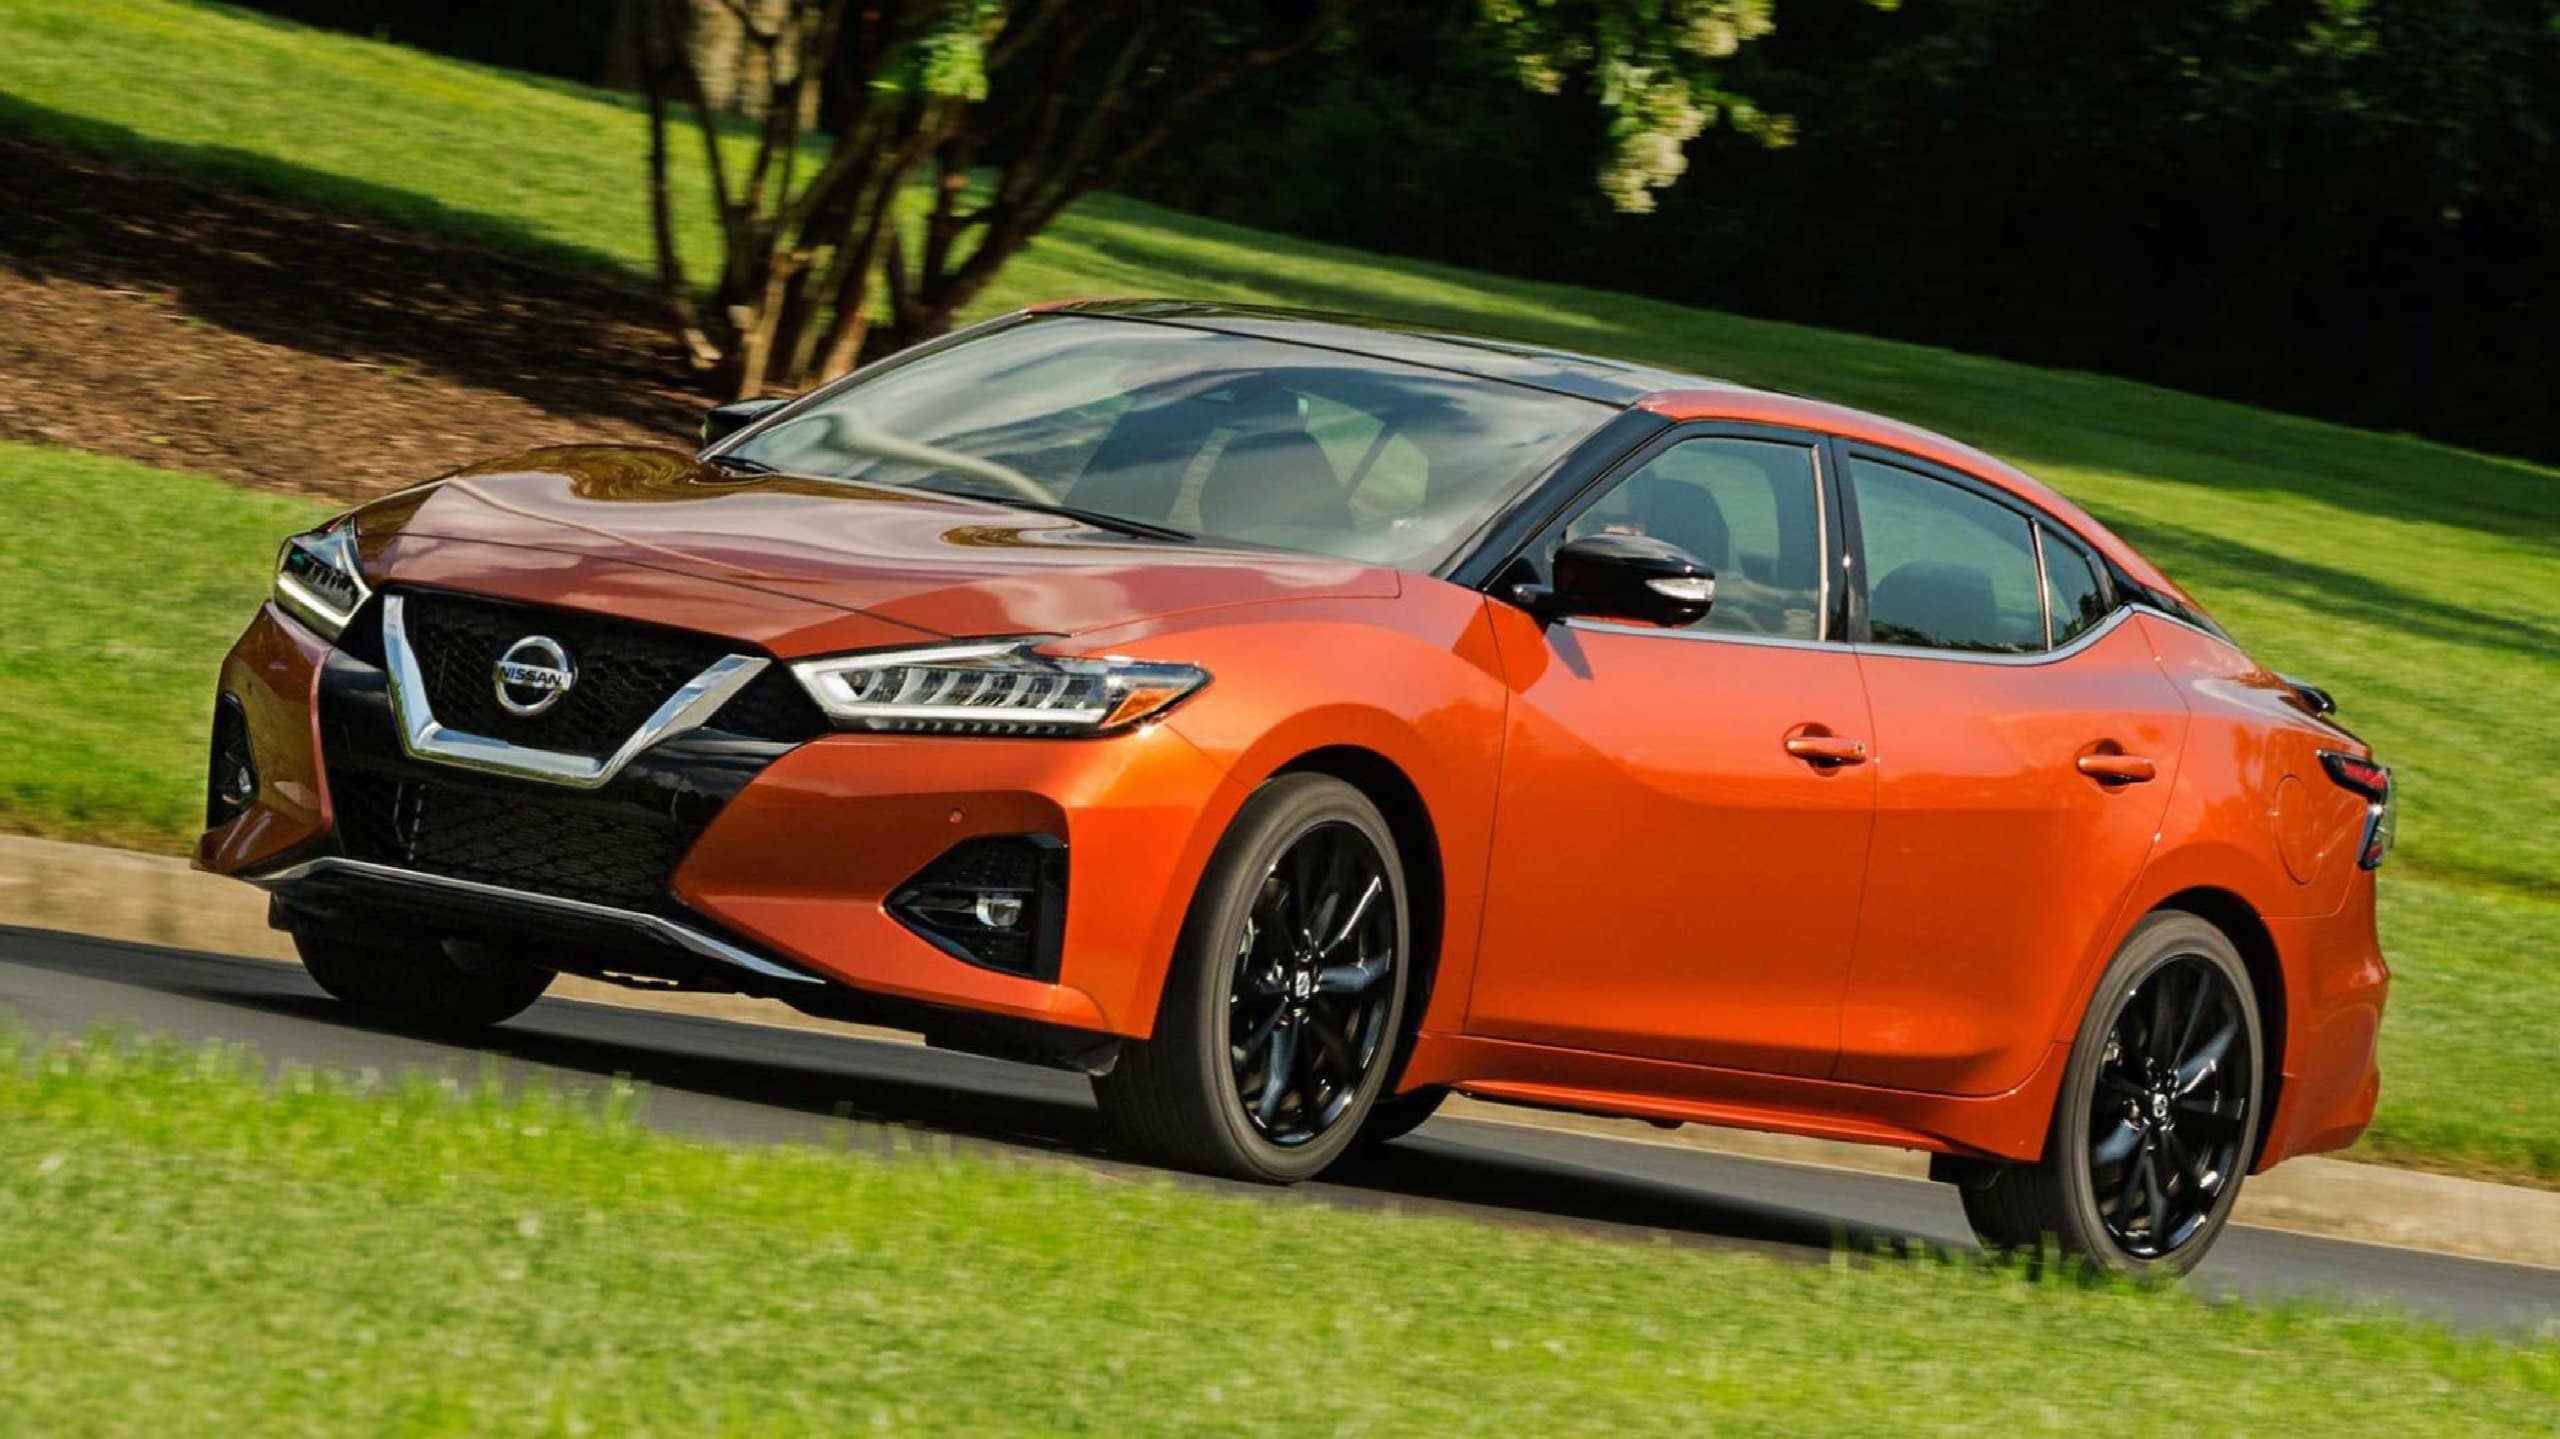 2022 Nissan Maxima Price, Value, Ratings & Reviews